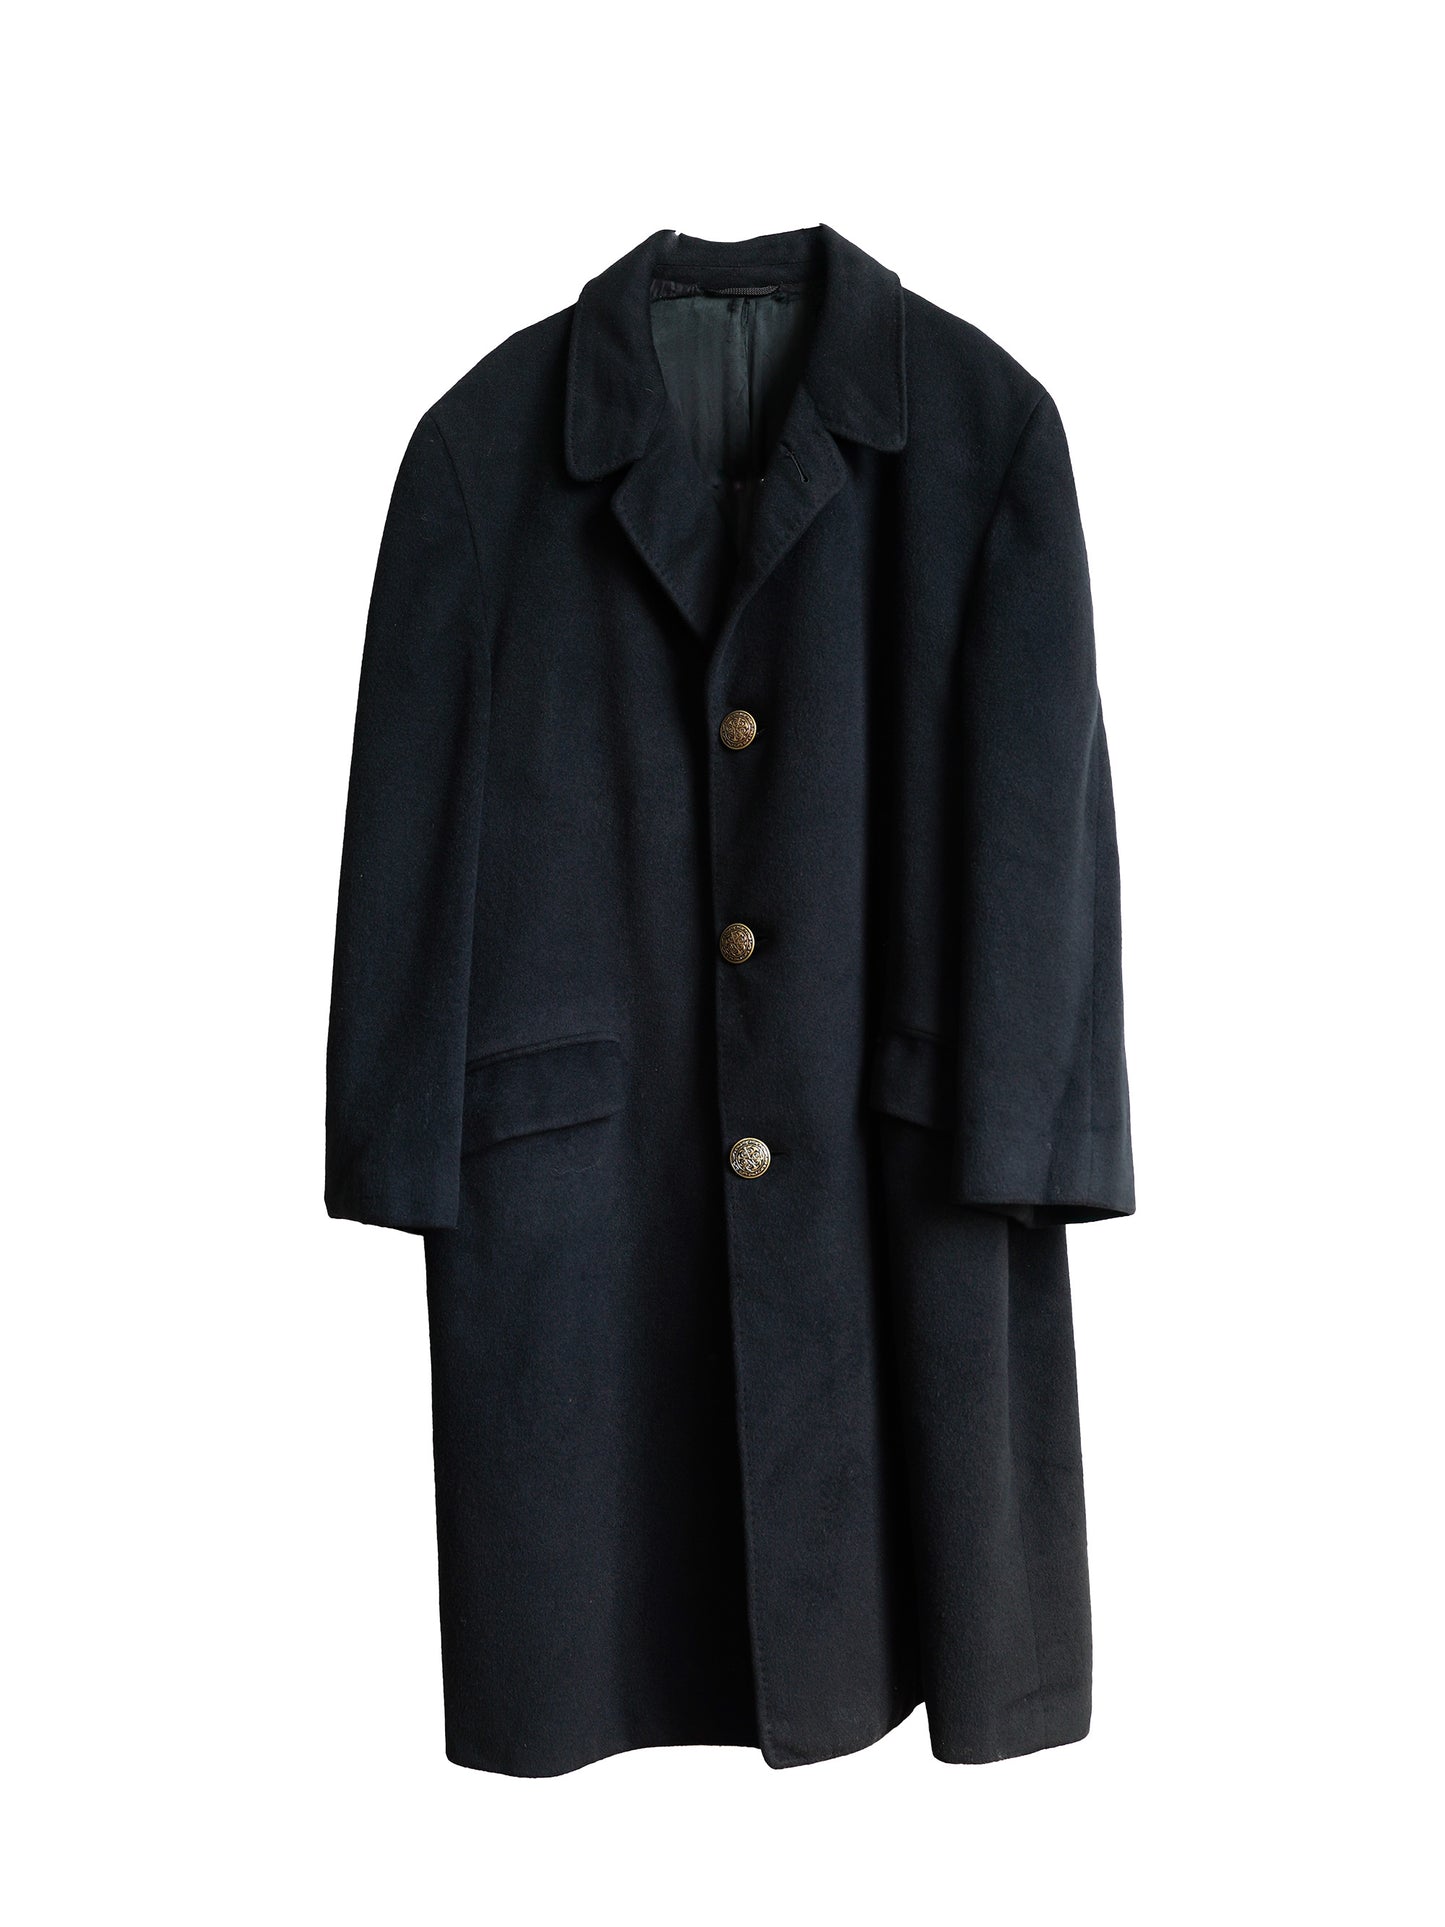 1950s CASHMERE CHESTERFIELD COAT